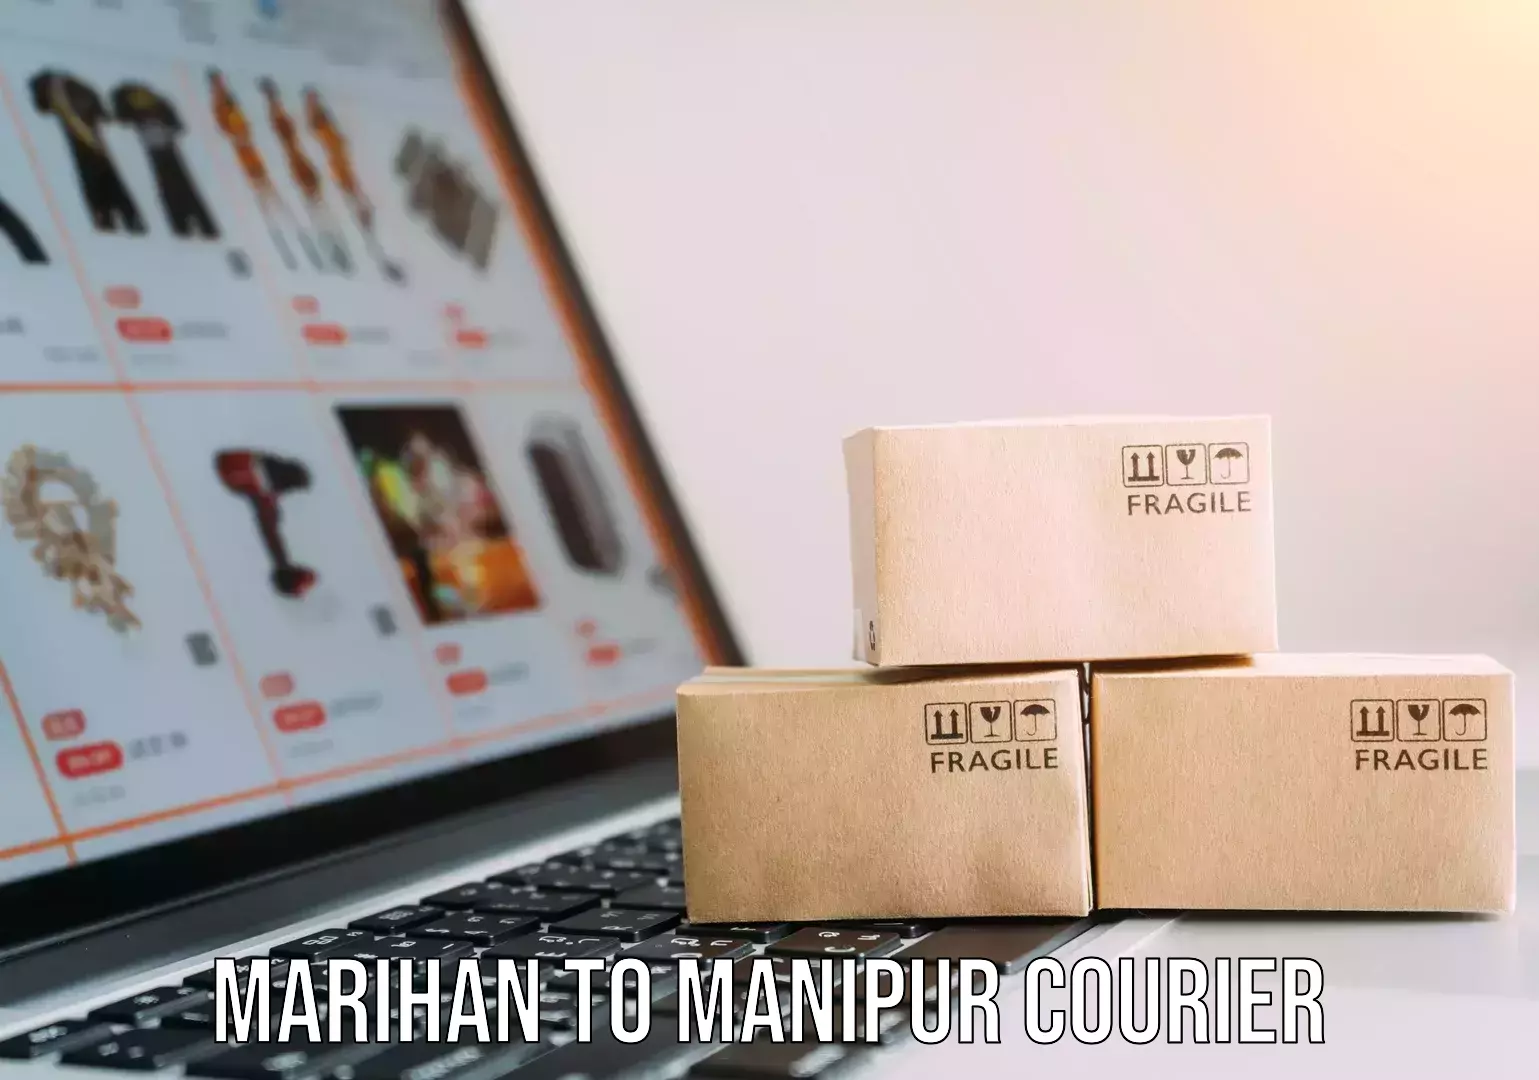 Home relocation experts Marihan to Manipur